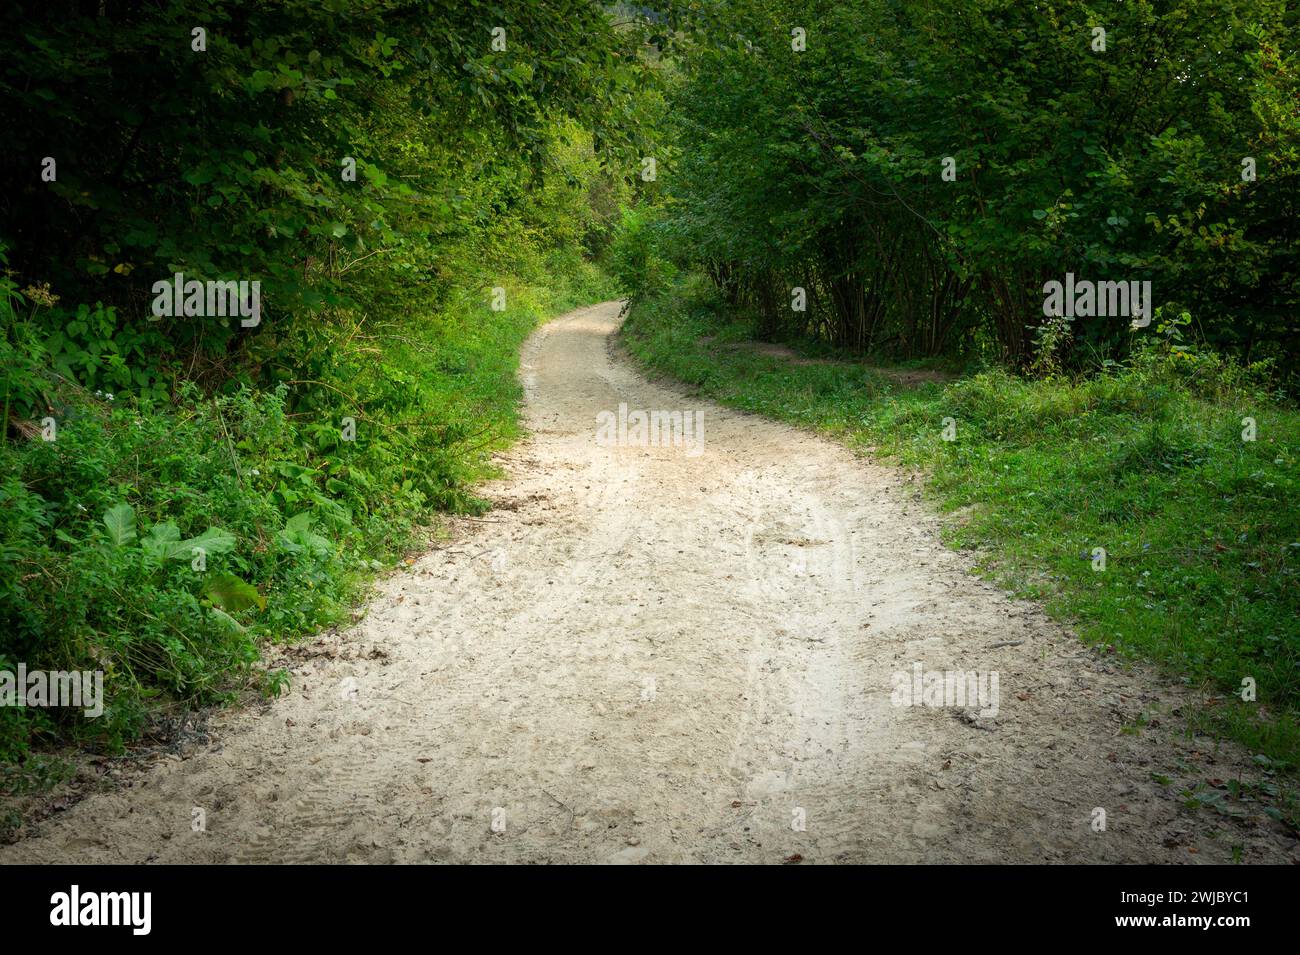 Sandy path through green shrubs. Empty pathway in forest. Sunny day, Europe, Poland, Bieszczady. Stock Photo